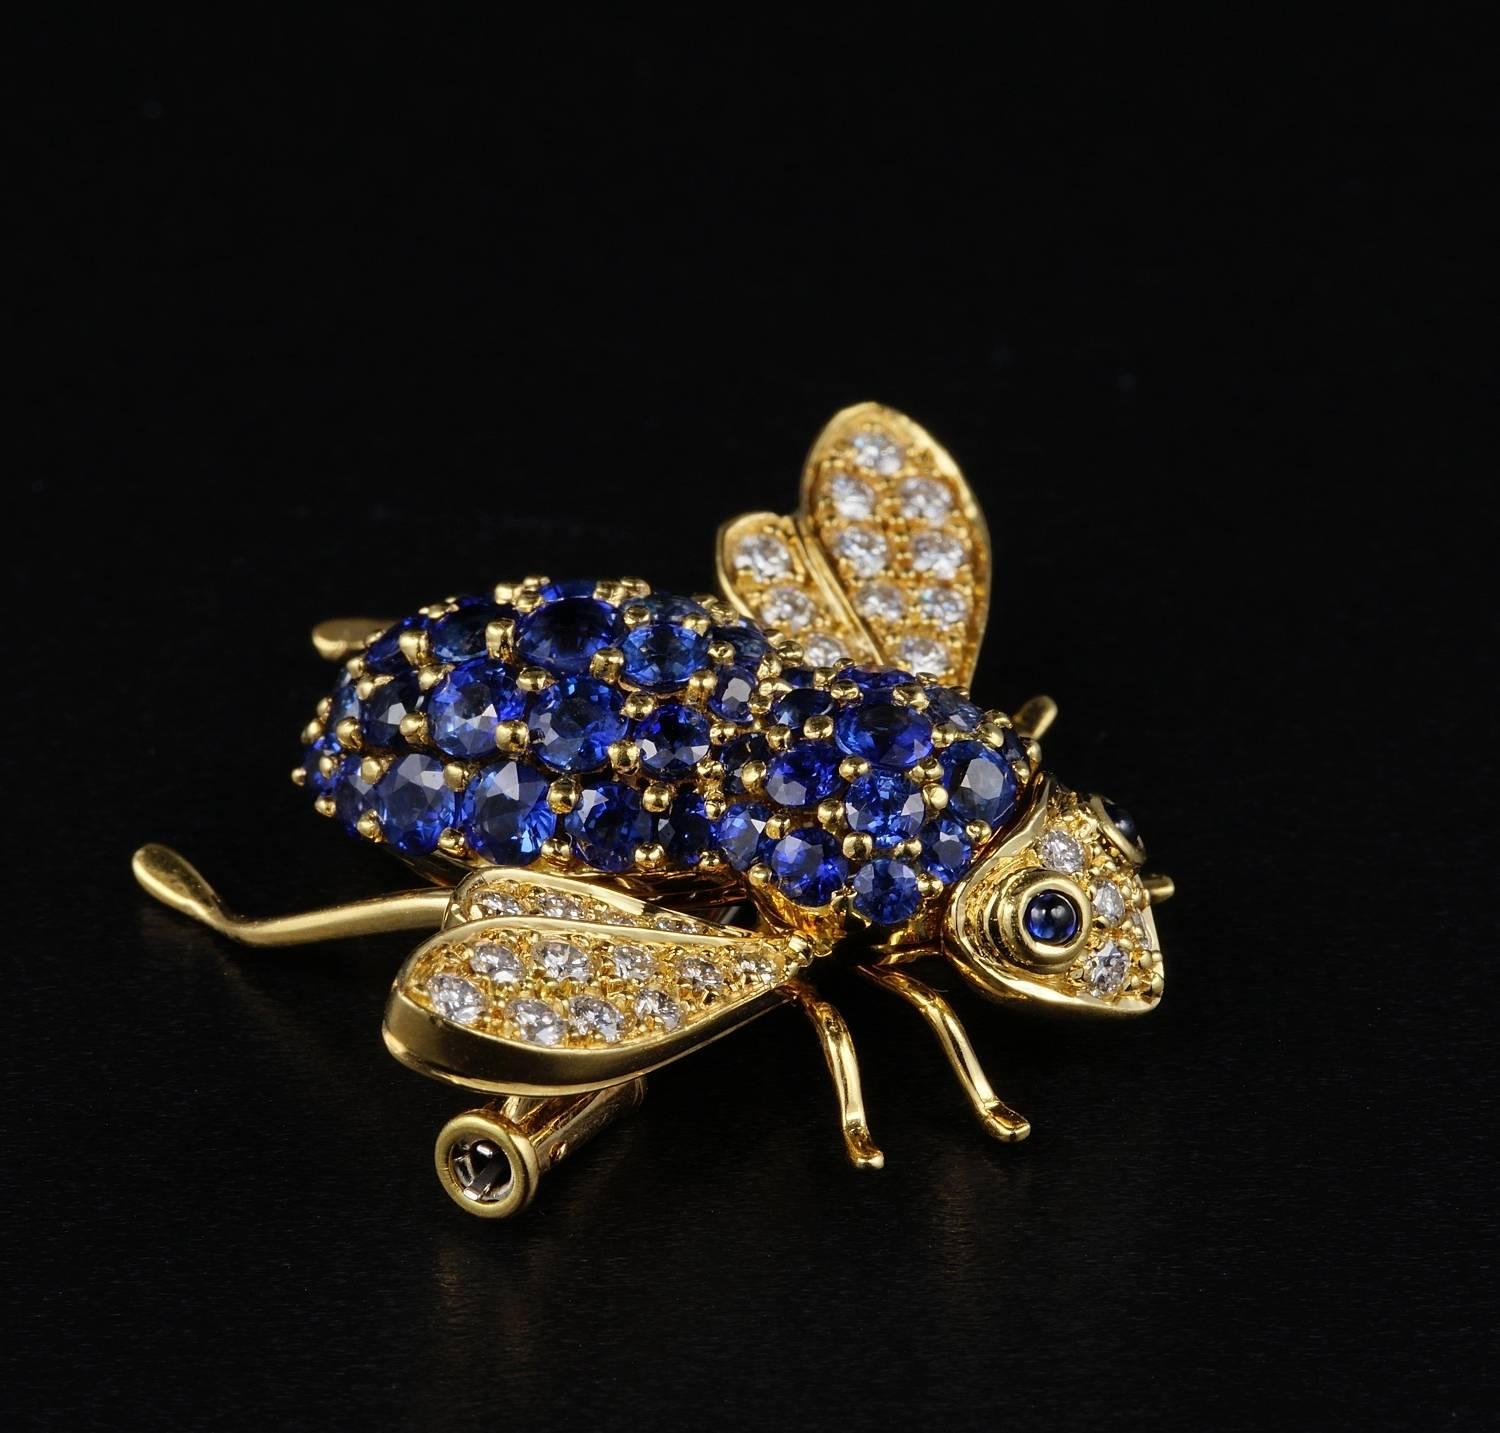 Contemporary Vintage 3.0 Carat Untreated Sapphire .80 Carat Diamond Bumble Bee Brooch For Sale